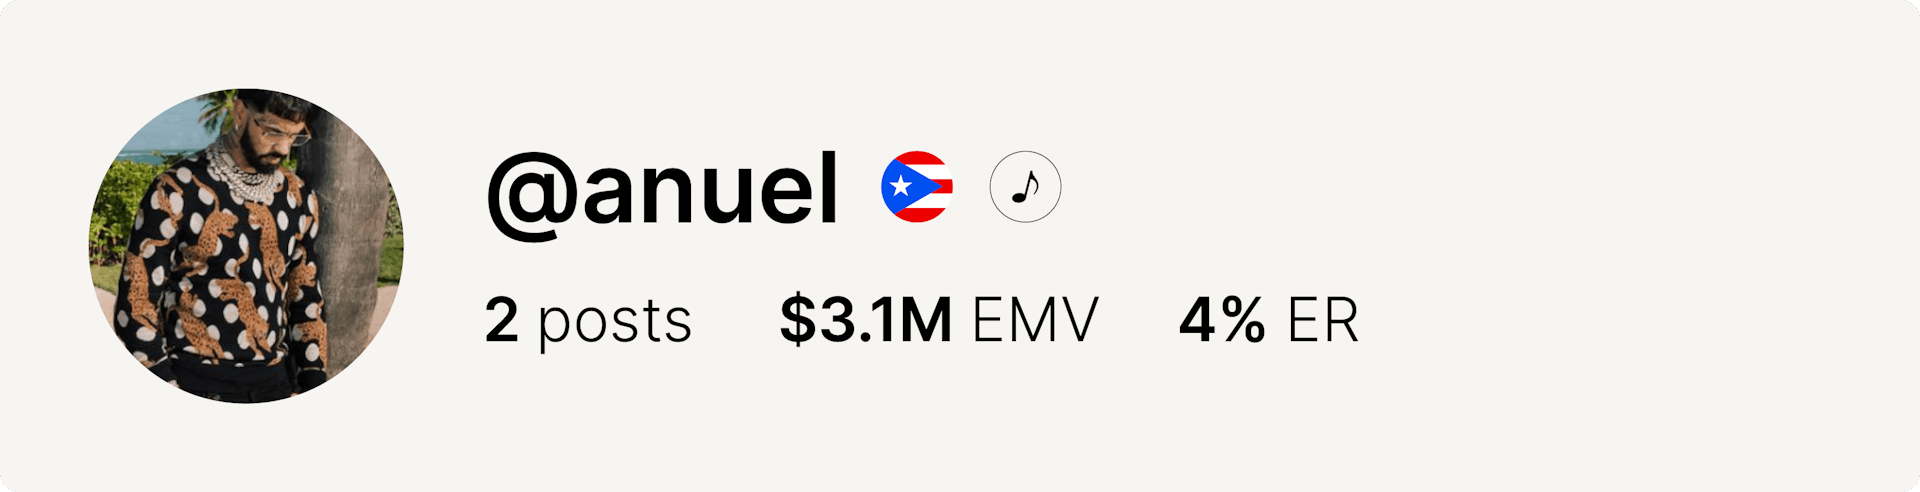 An image of rapper Anuel AA's Instagram account and data from the fashion week.